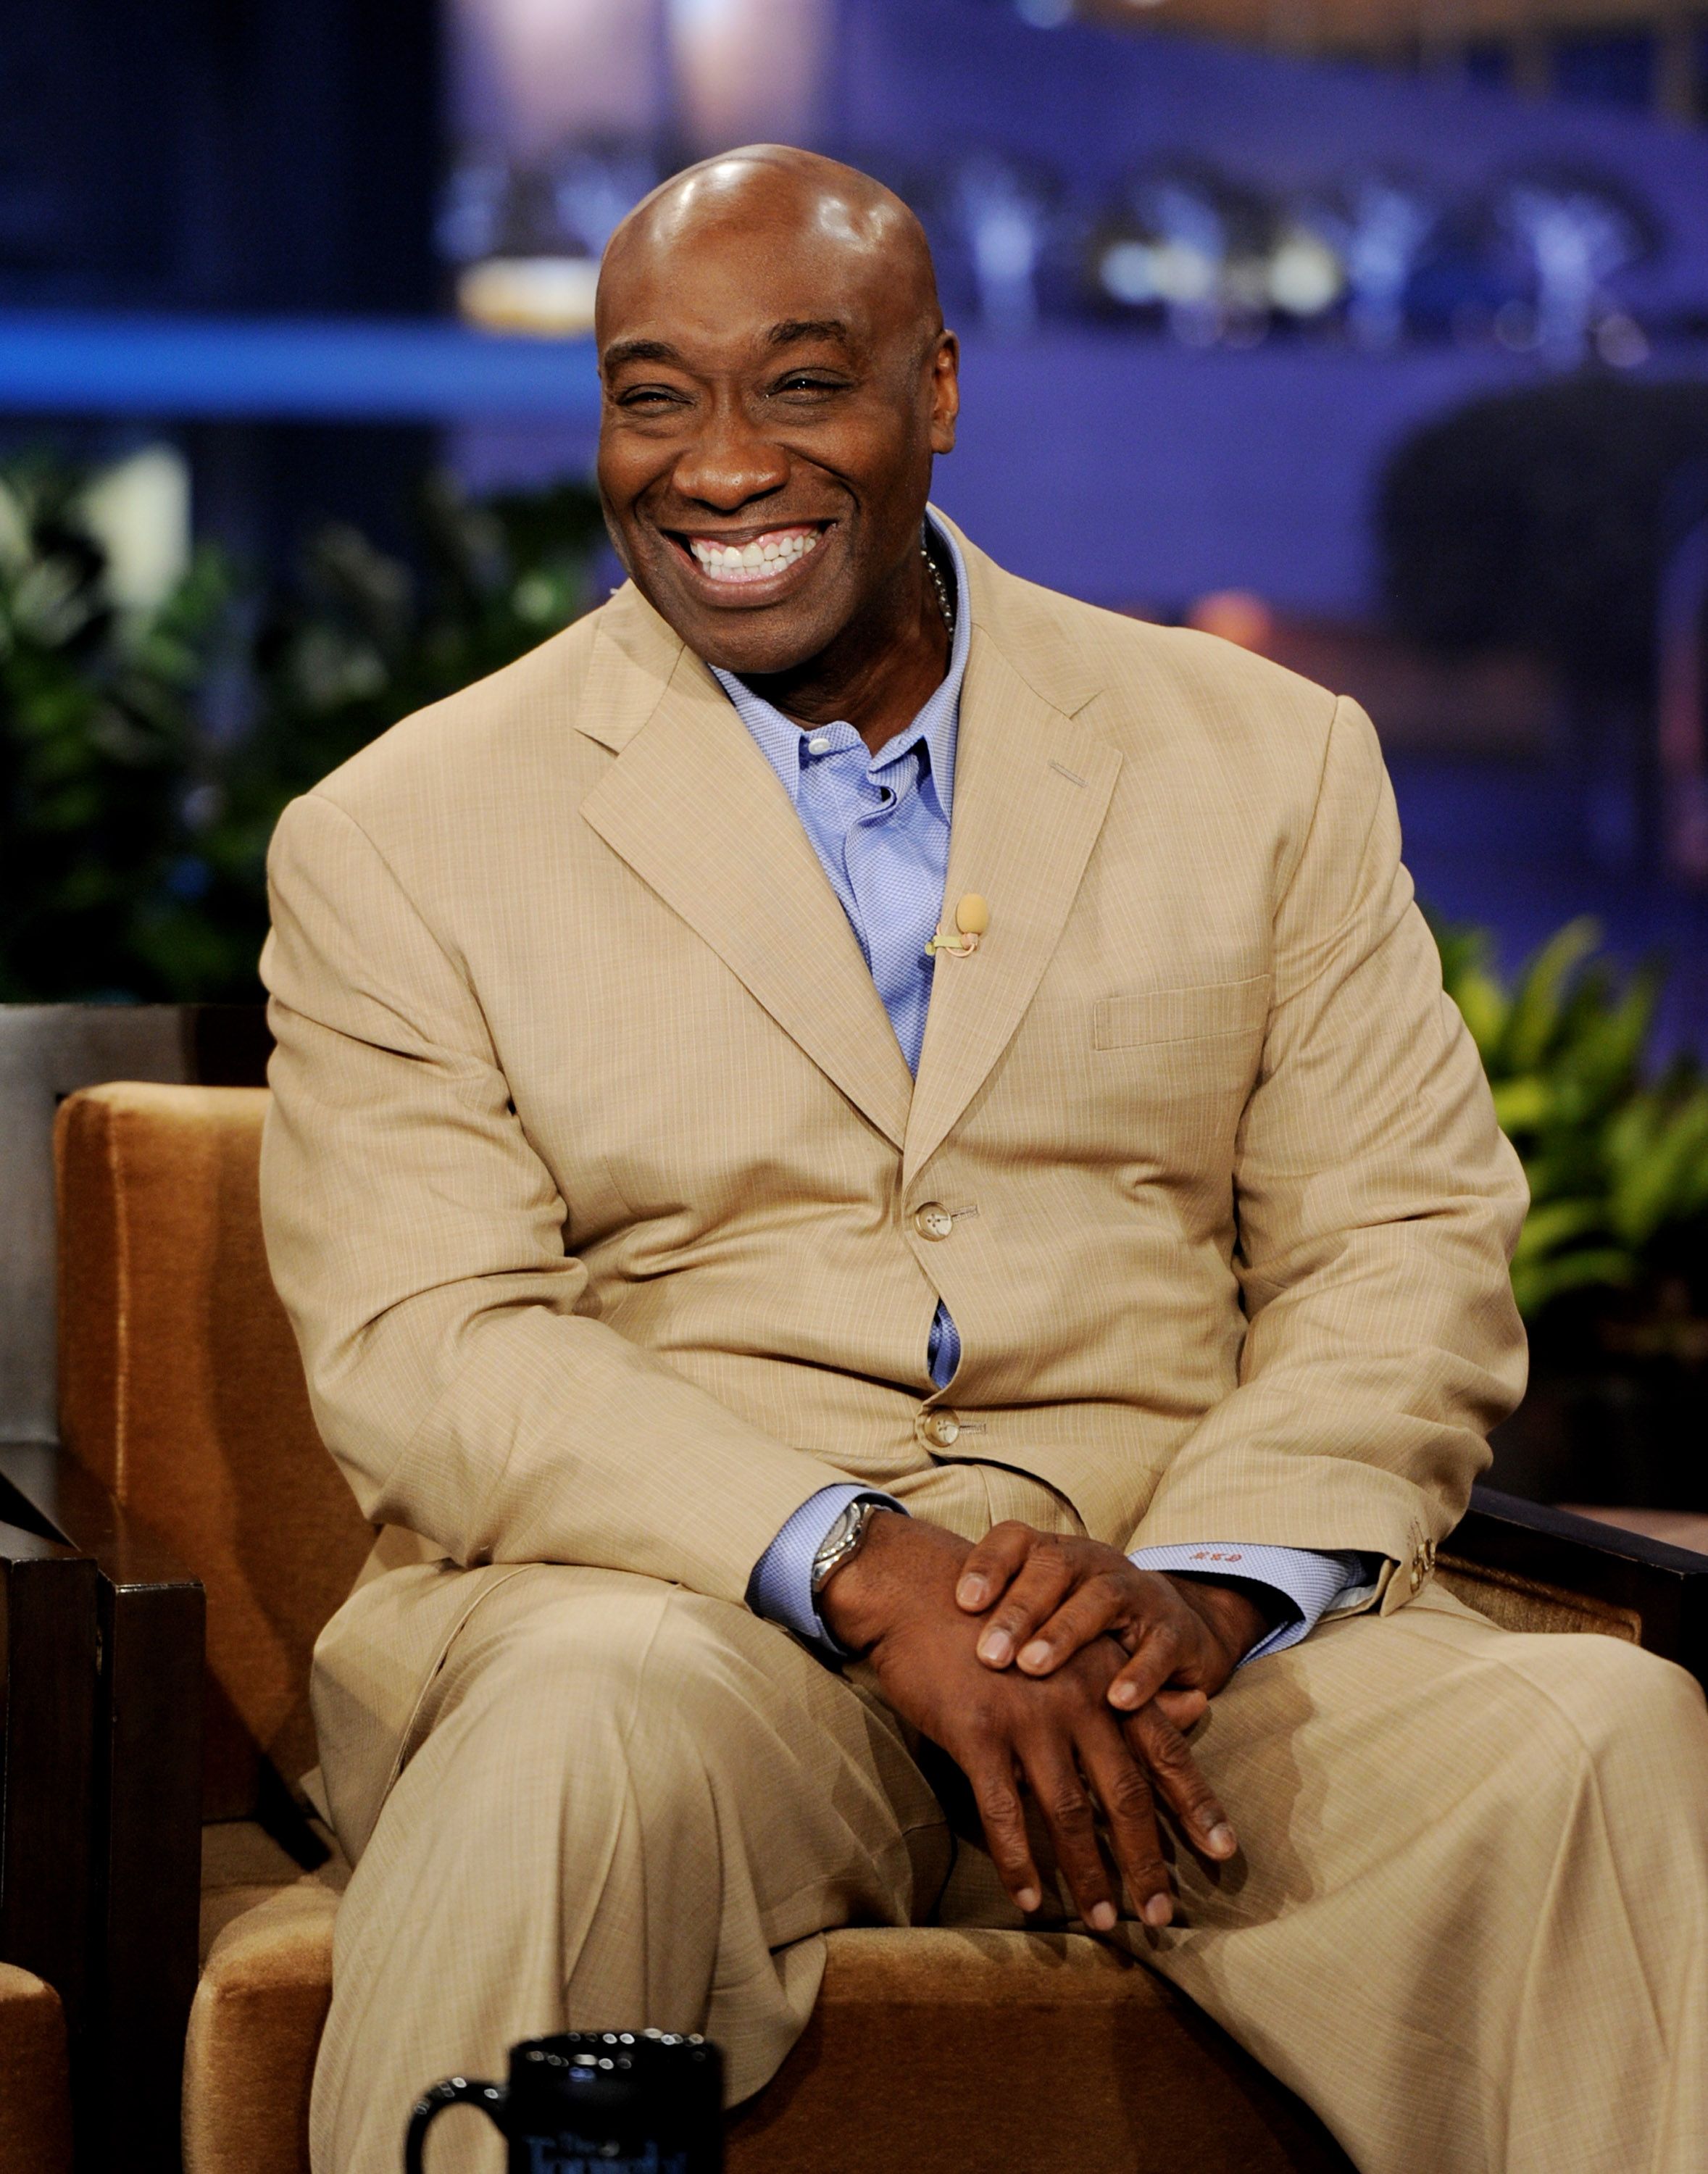 Michael Clarke Duncan appears on the Tonight Show With Jay Leno at NBC Studios on February 20, 2012 in Burbank, California. | Source: Getty Images